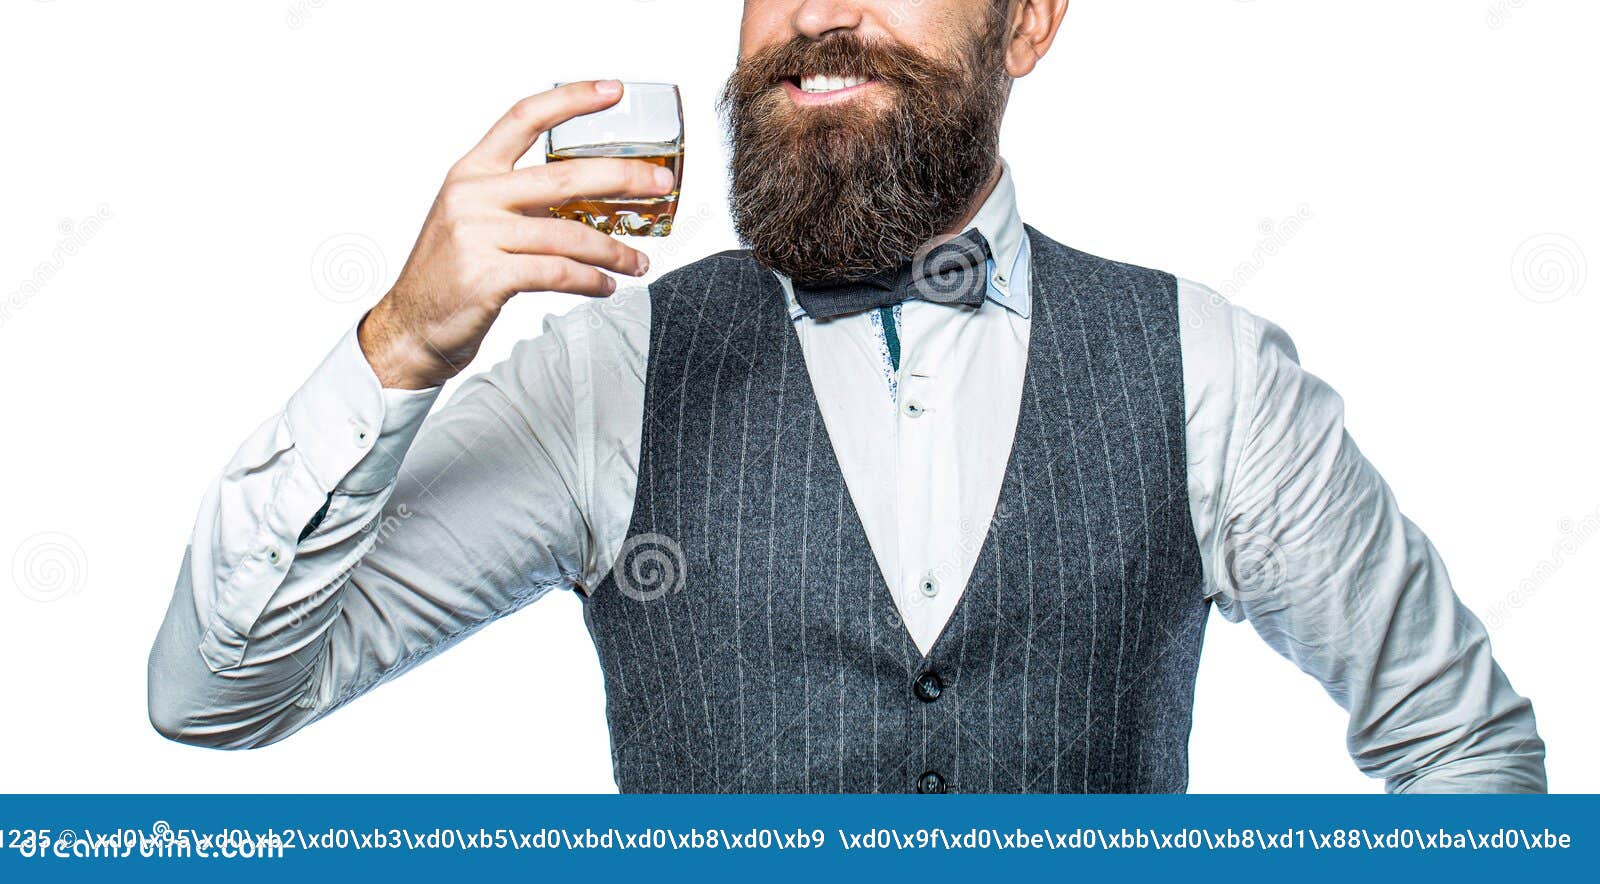 Sipping Finest Whiskey. Stylish Rich Man Holding a Glass of Old Whisky ...